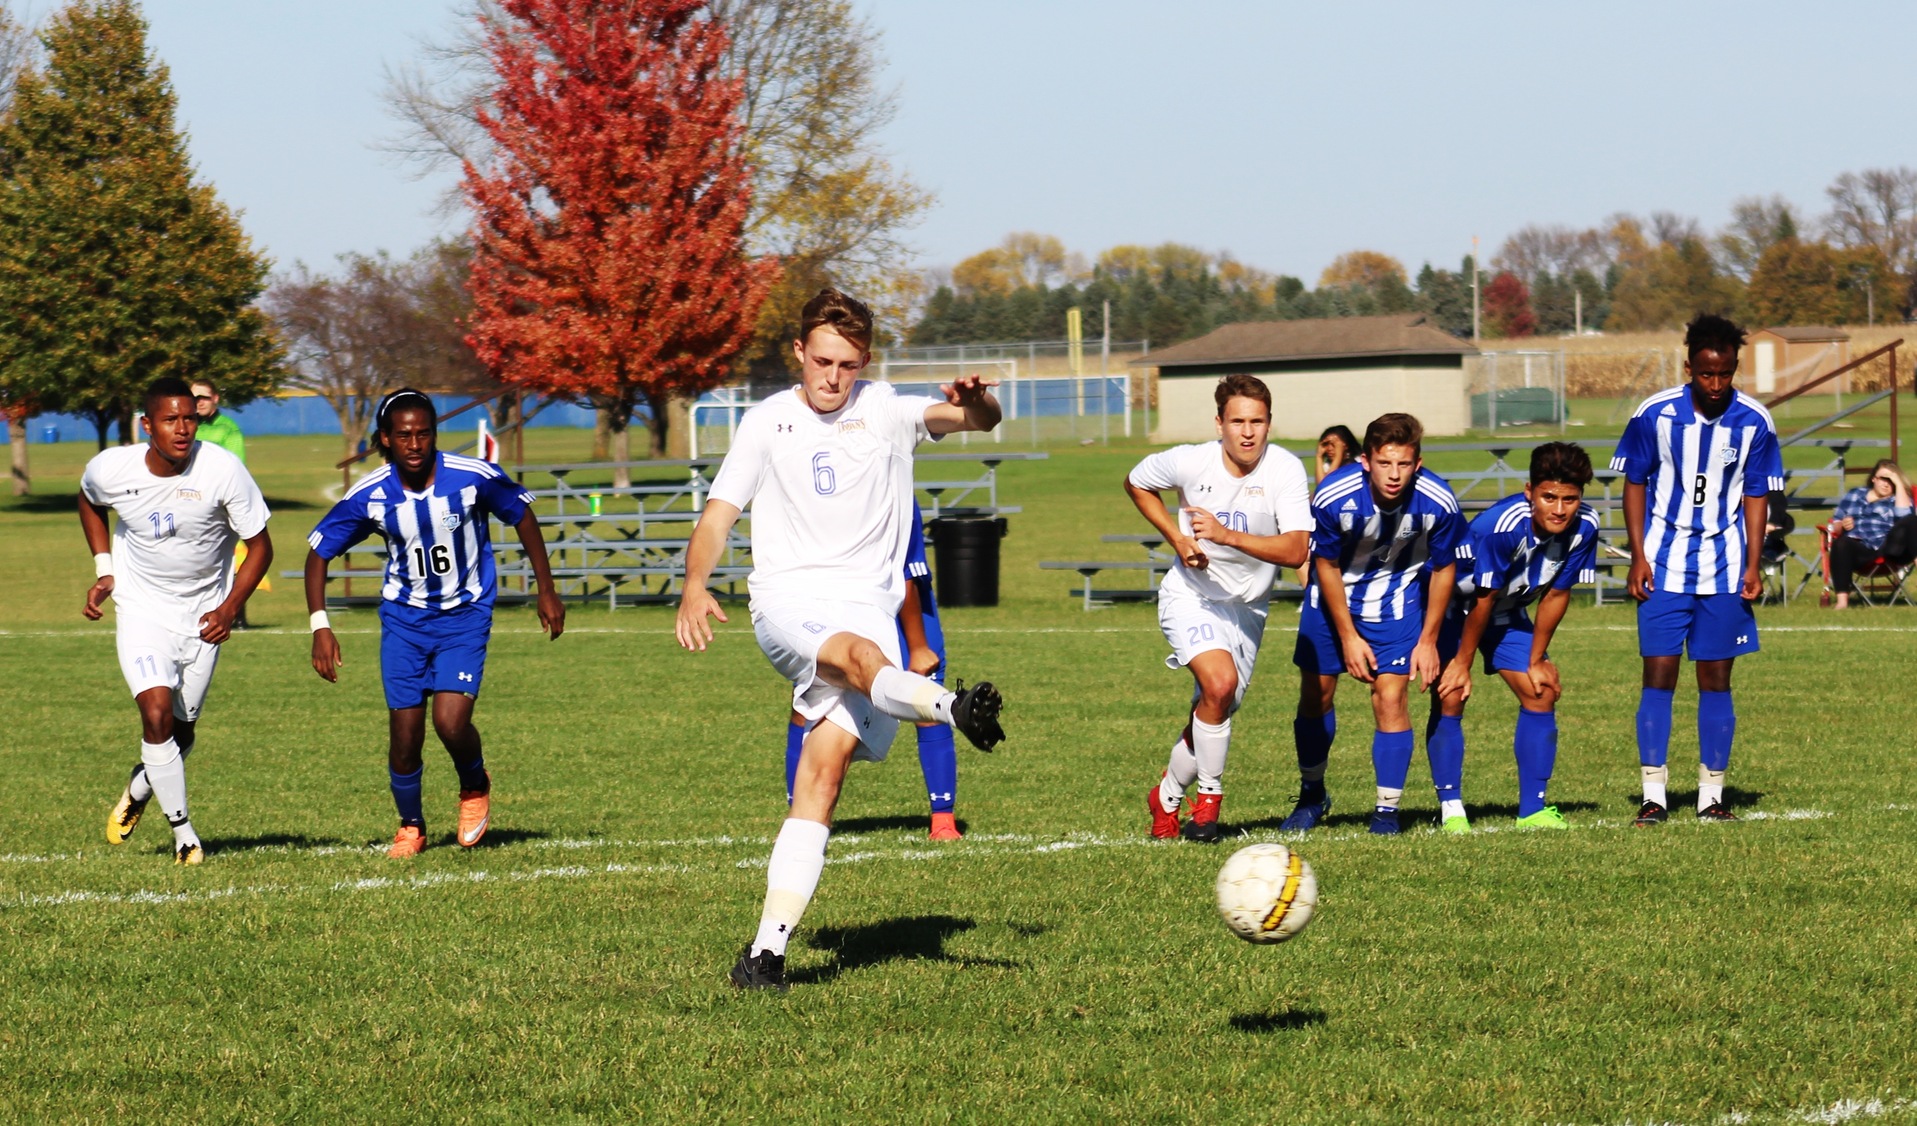 NIACC's Harry Holland scores on a penalty kick in the first half of Tuesday against DCTC.